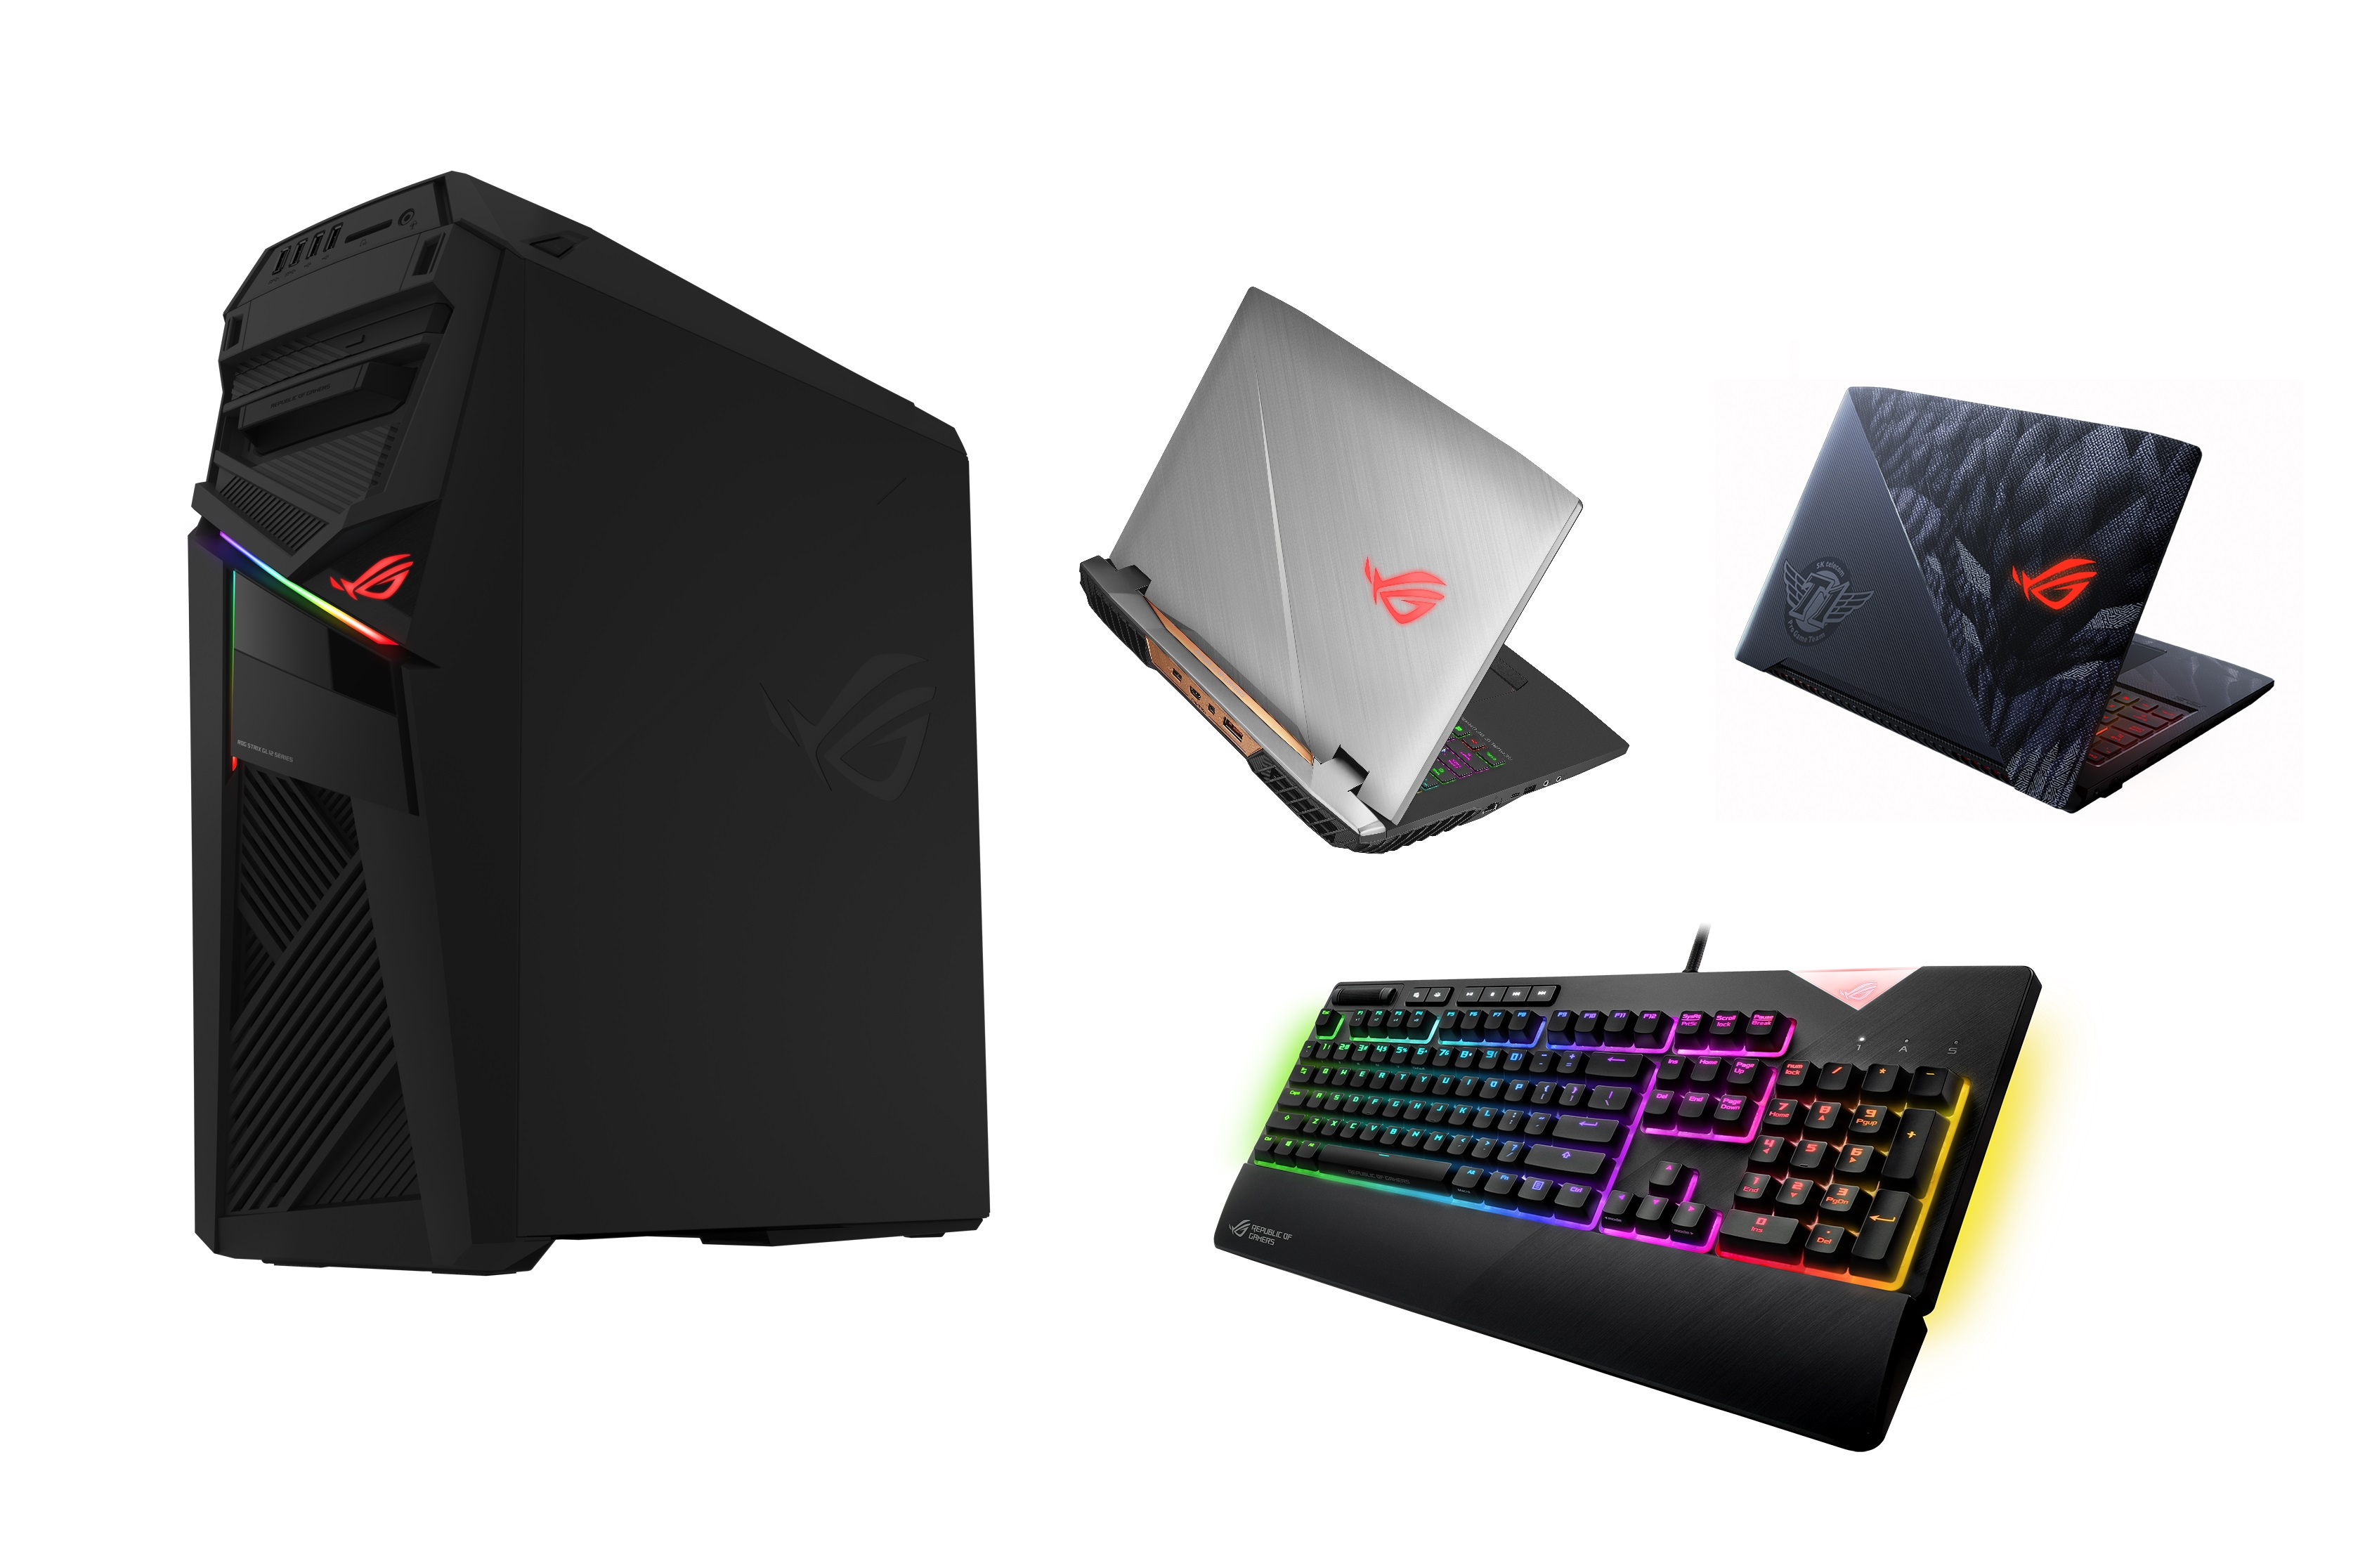 CES 2018: ASUS unleashed a wide array of ROG gaming products